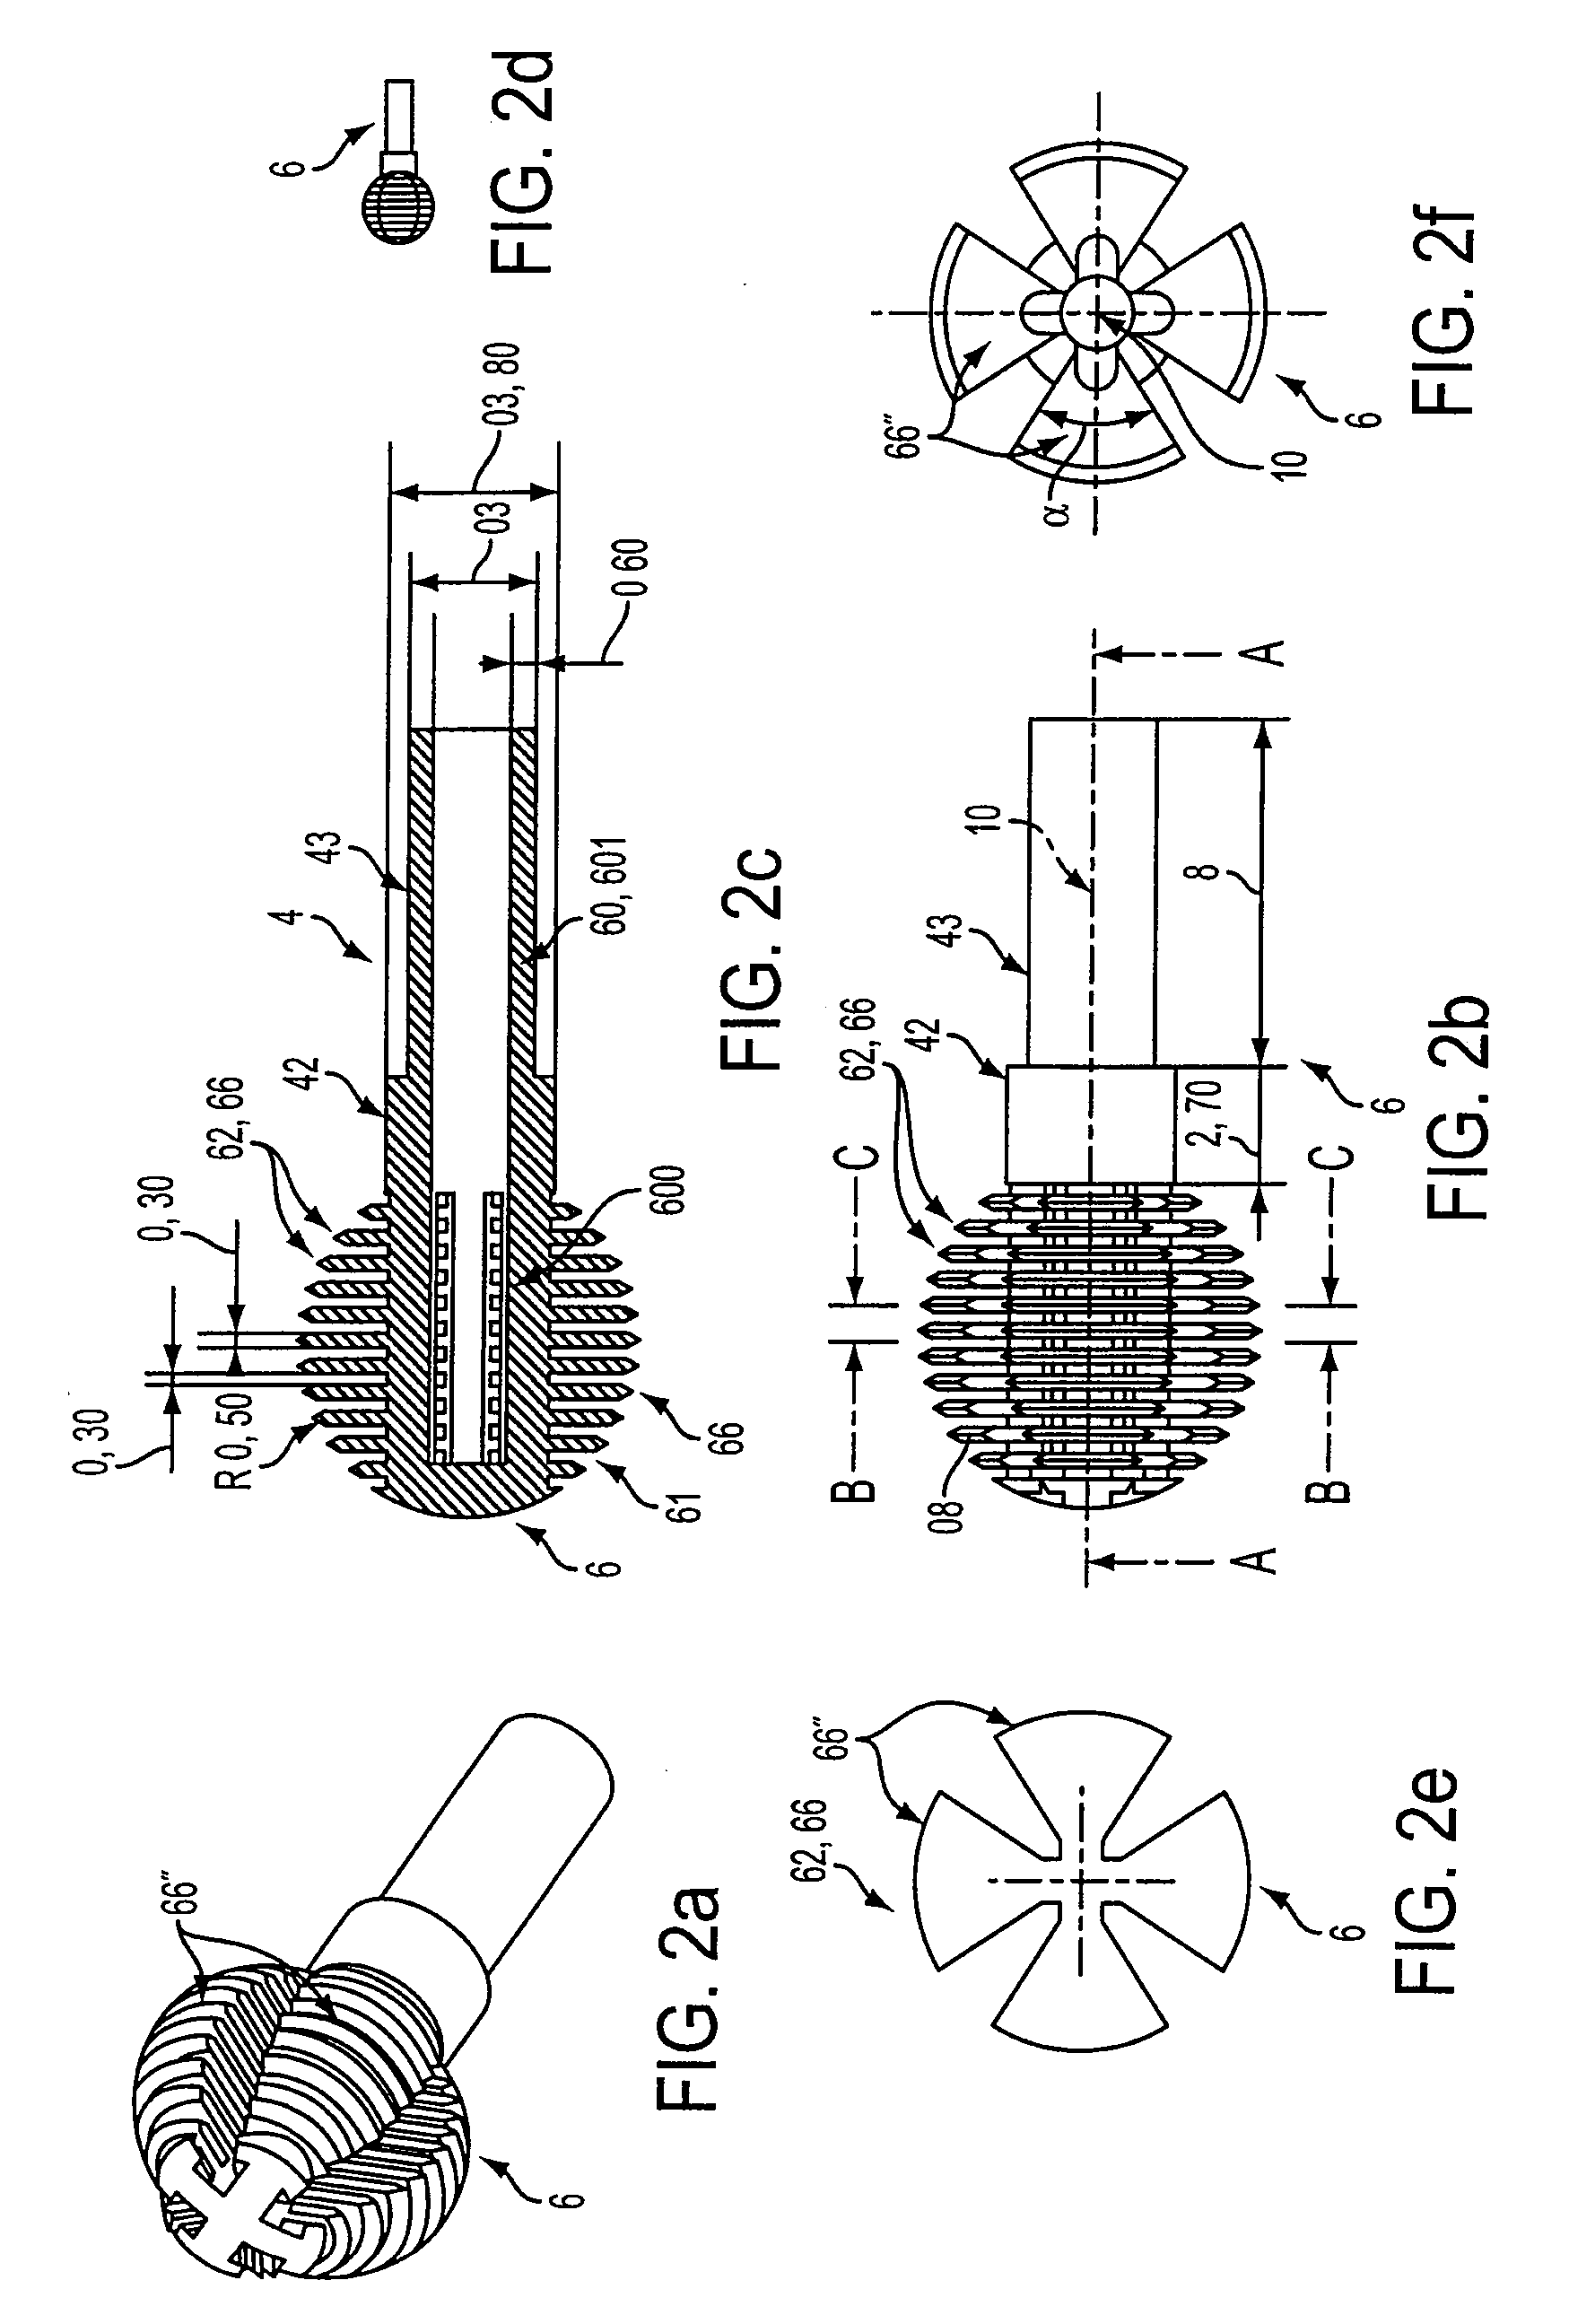 Typically Spherical Applicator Tip For Application Of Cosmetic Products